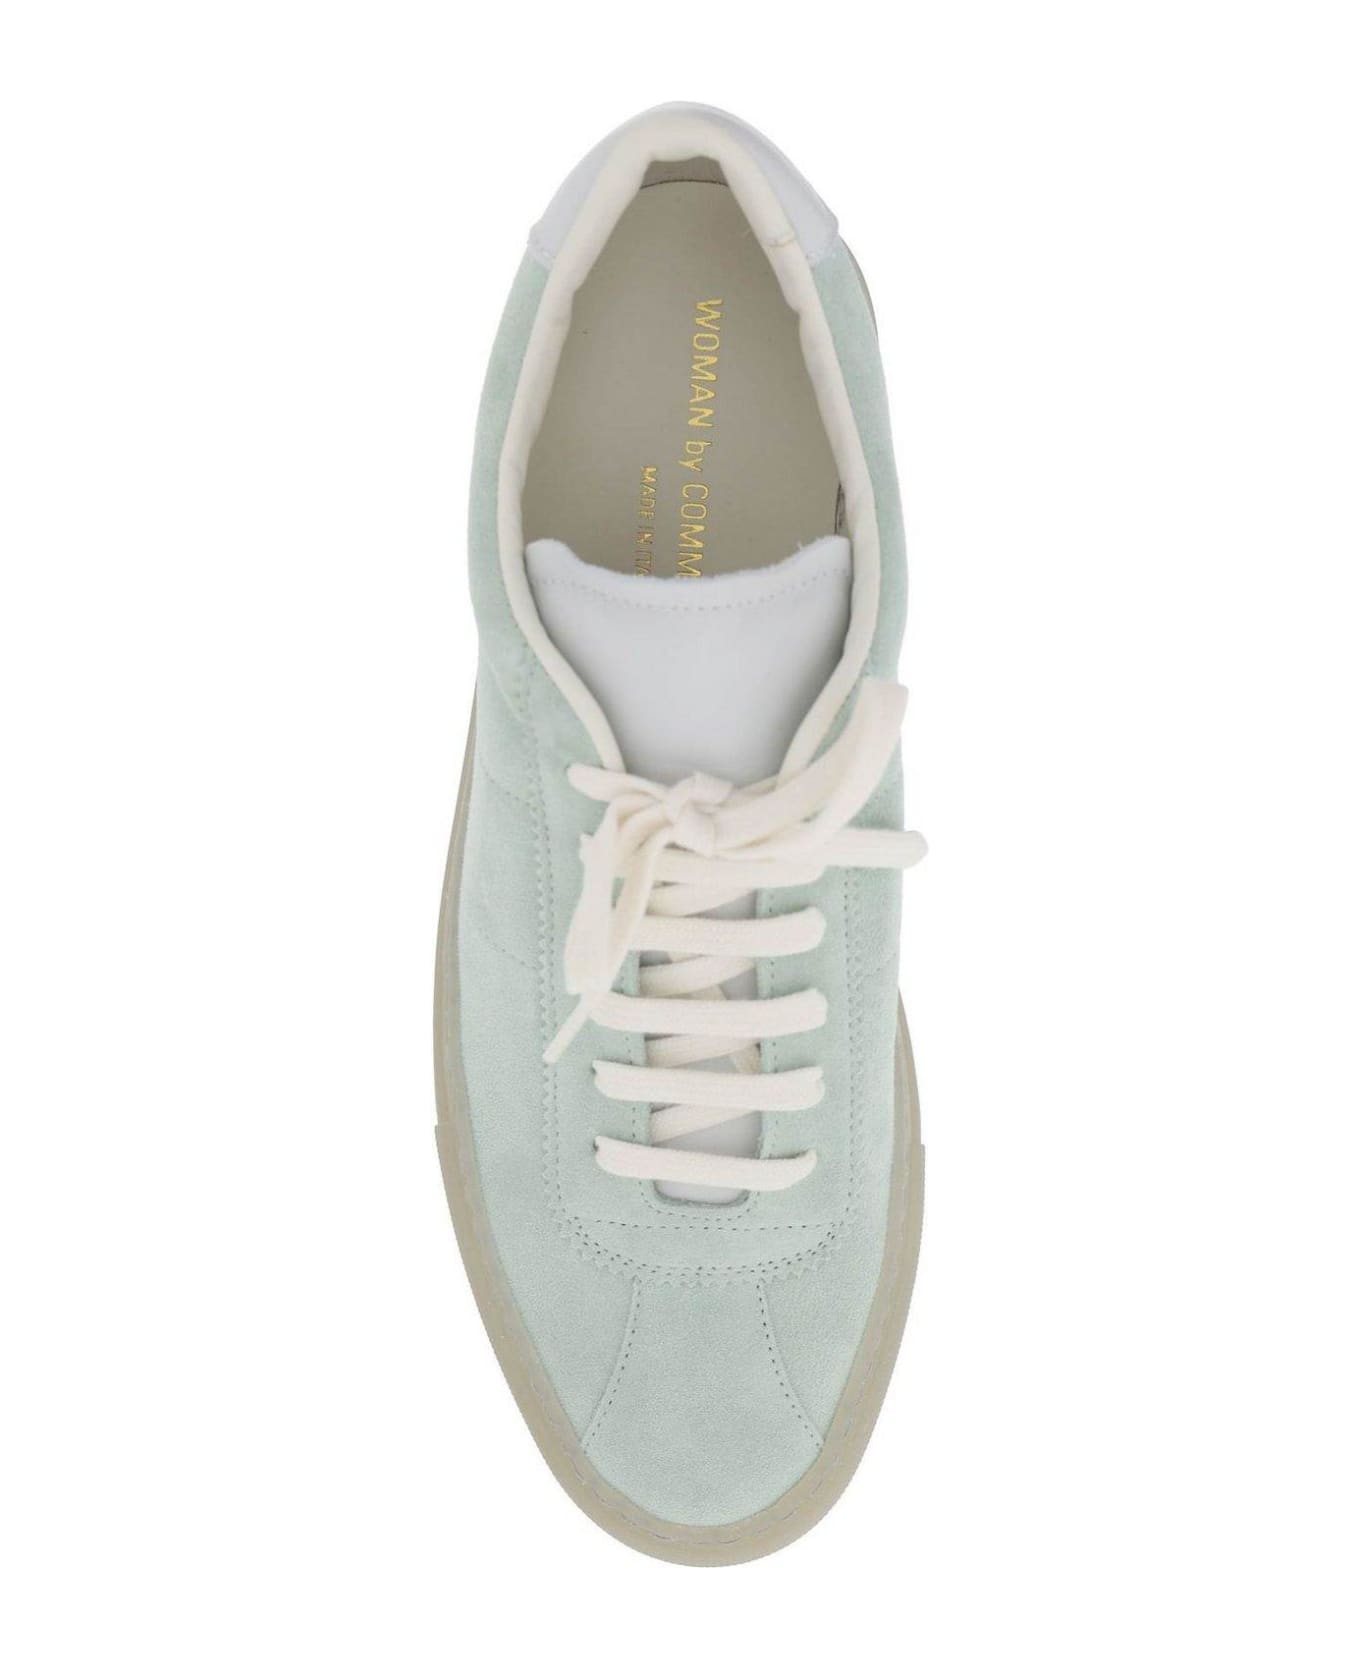 Common Projects Retro Low-top Sneakers - MINT (Green)